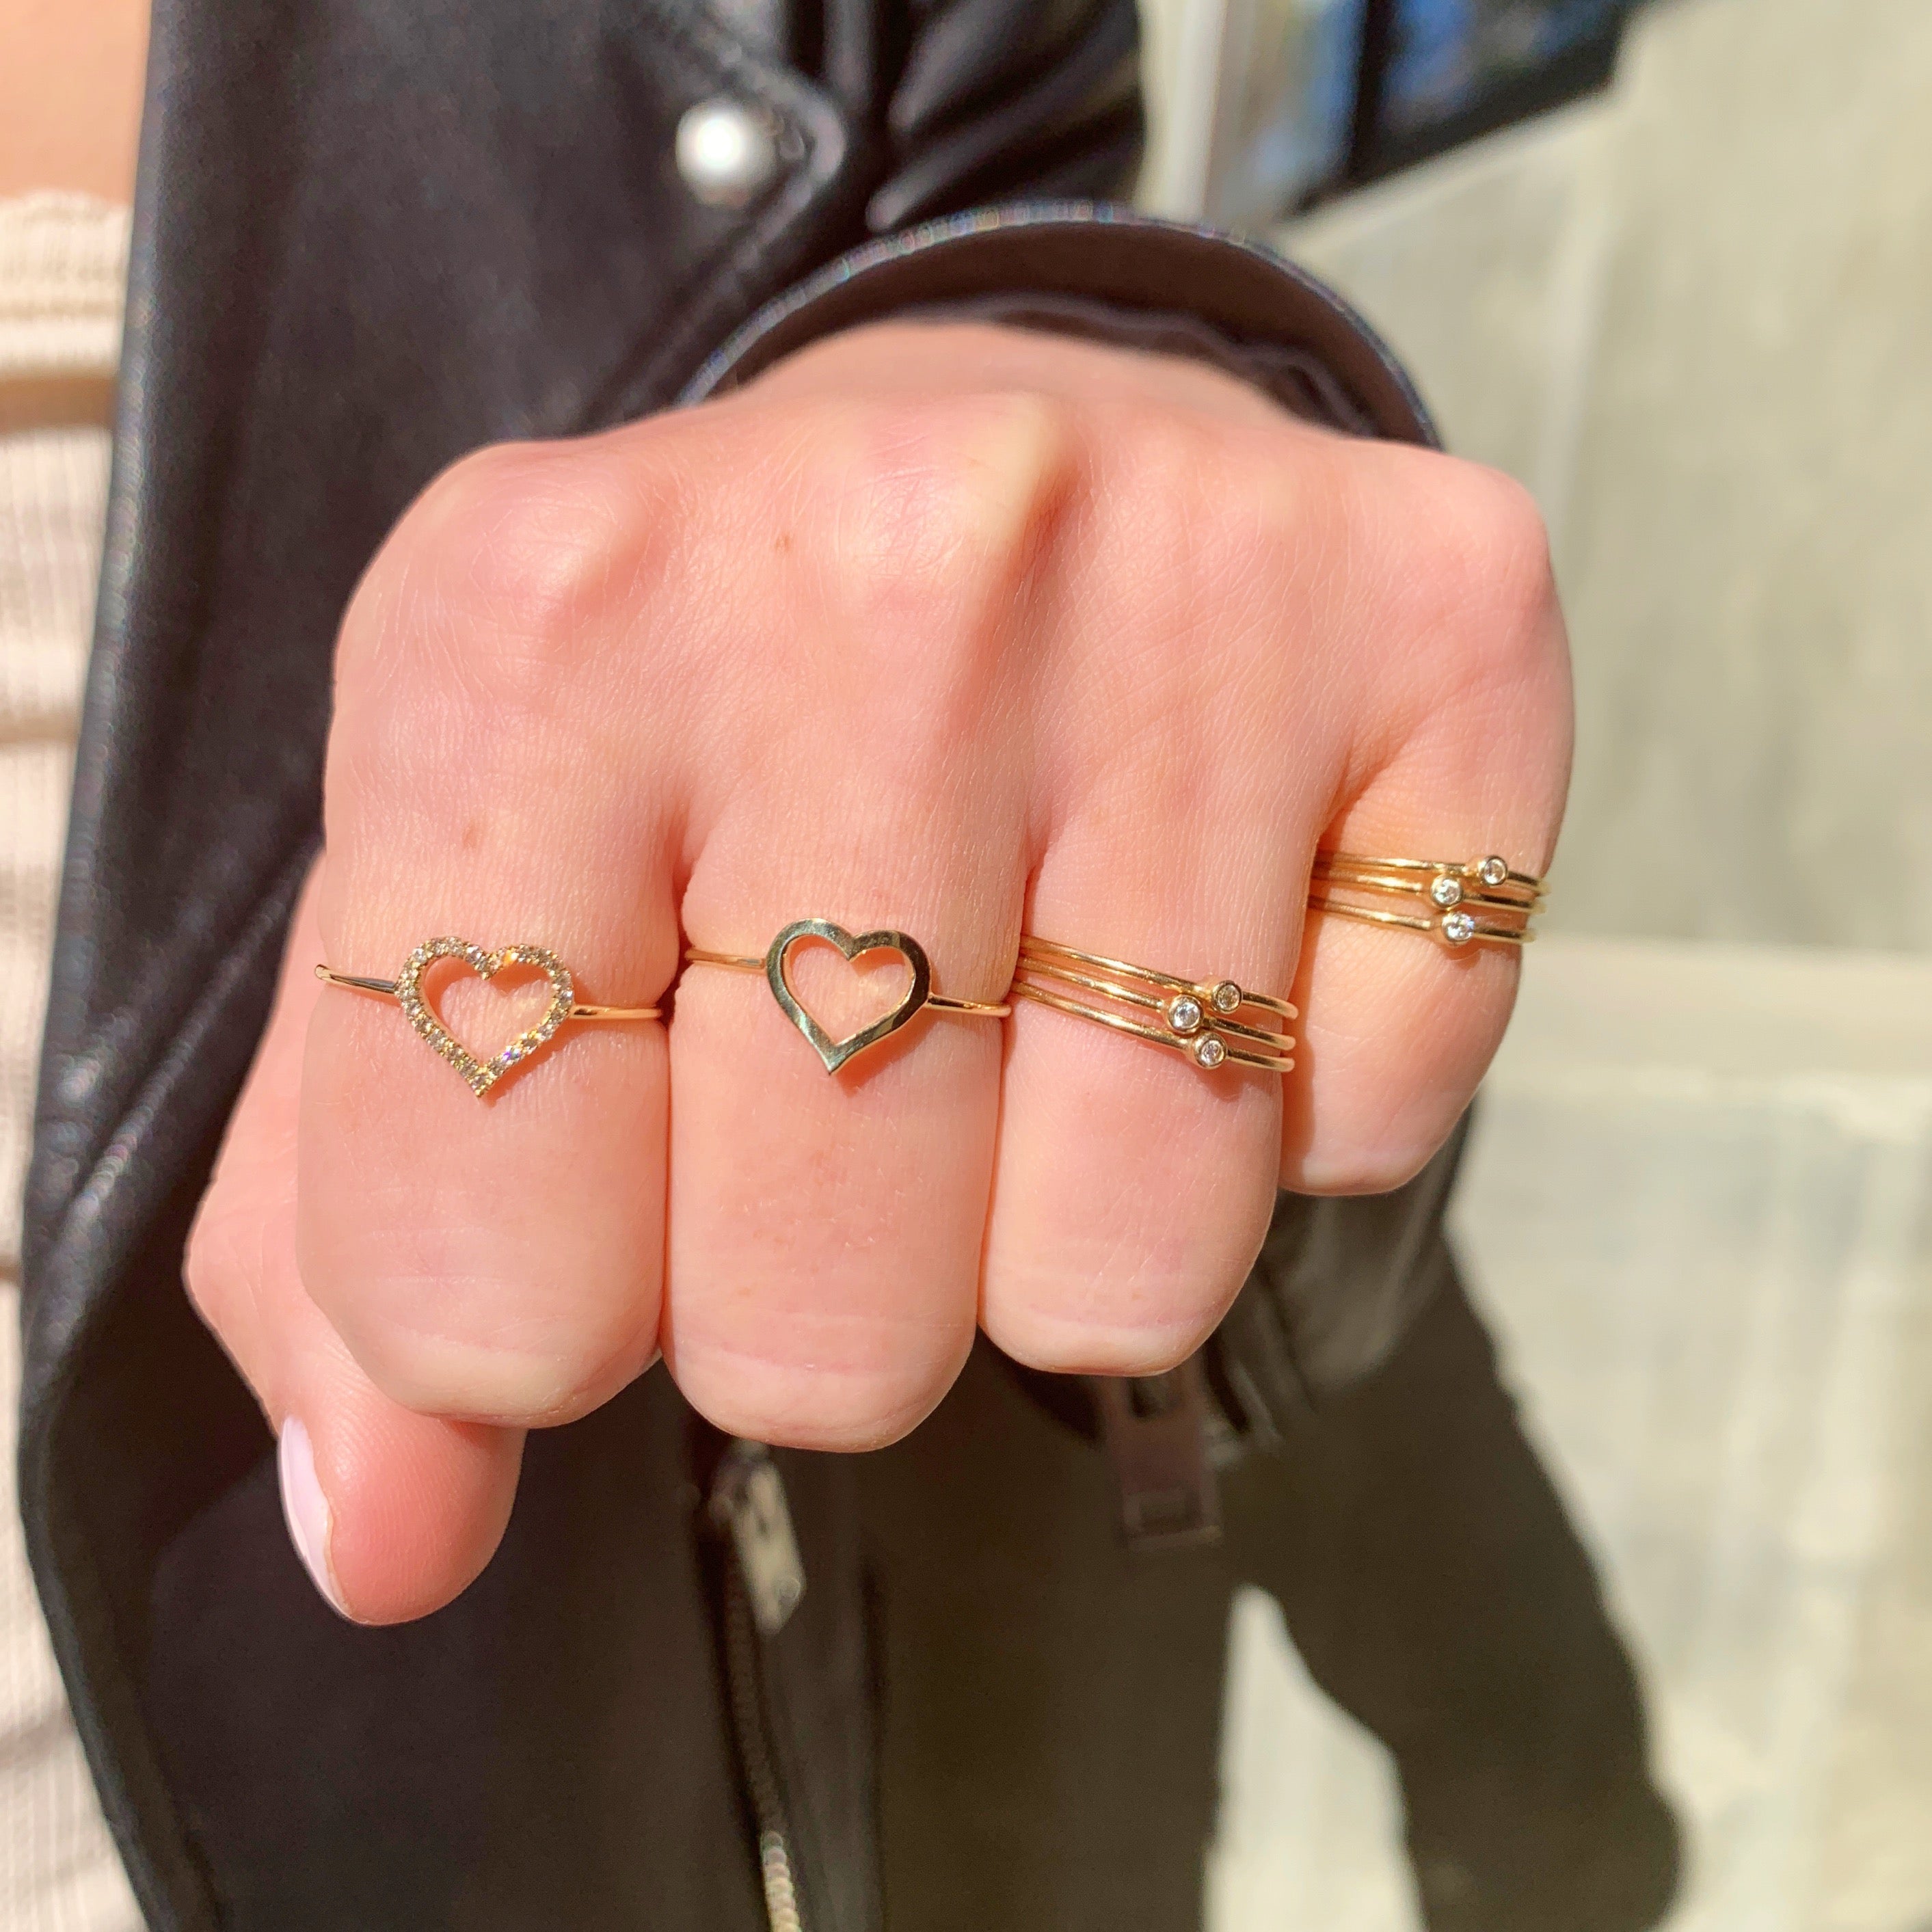 Small Open Heart Ring